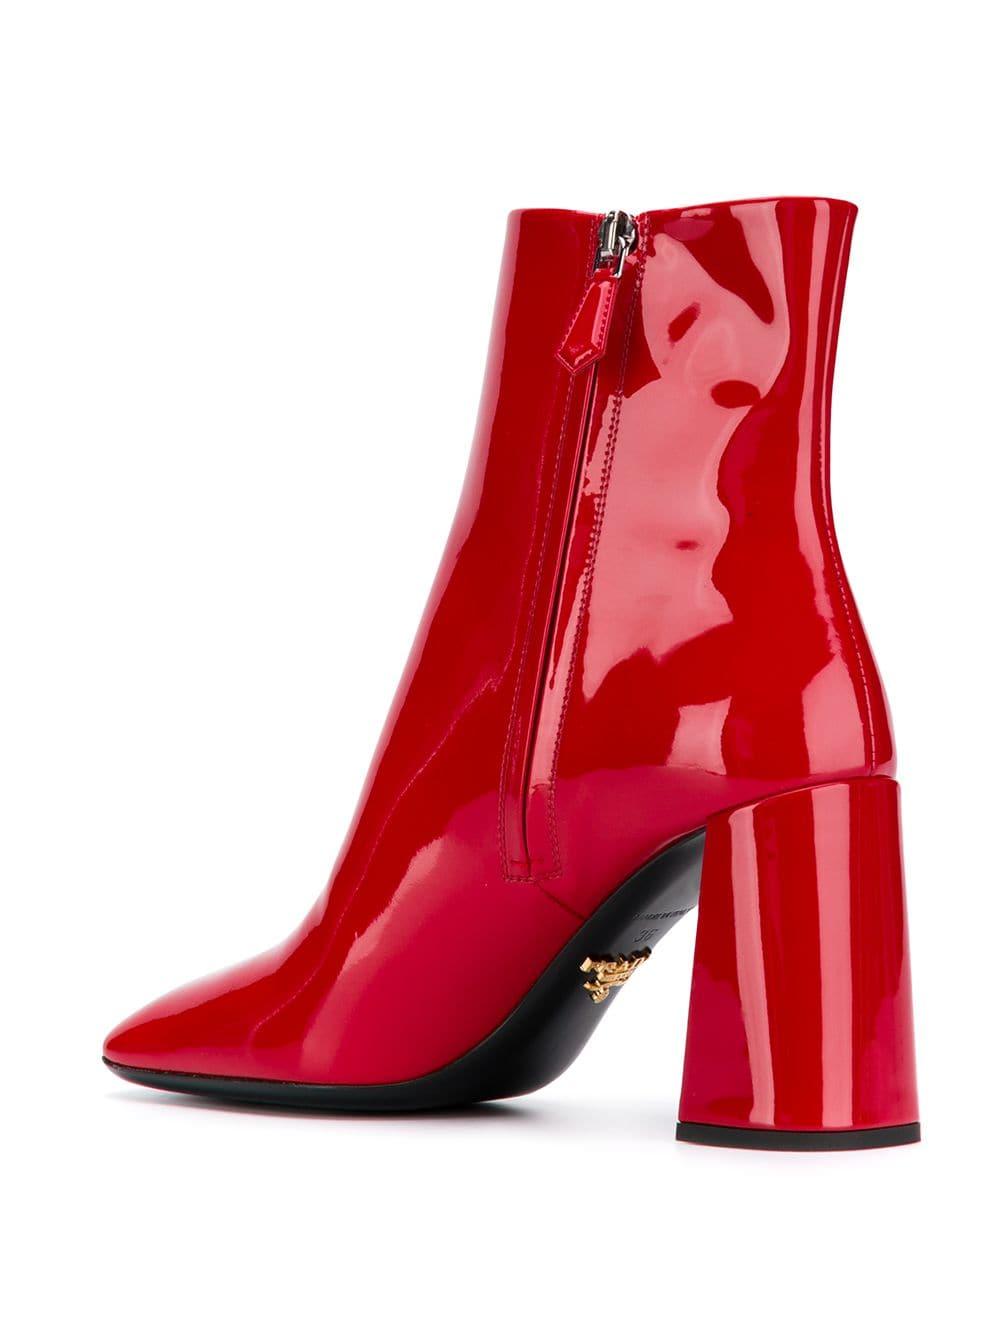 Prada Patent Leather Boots in Red | Lyst